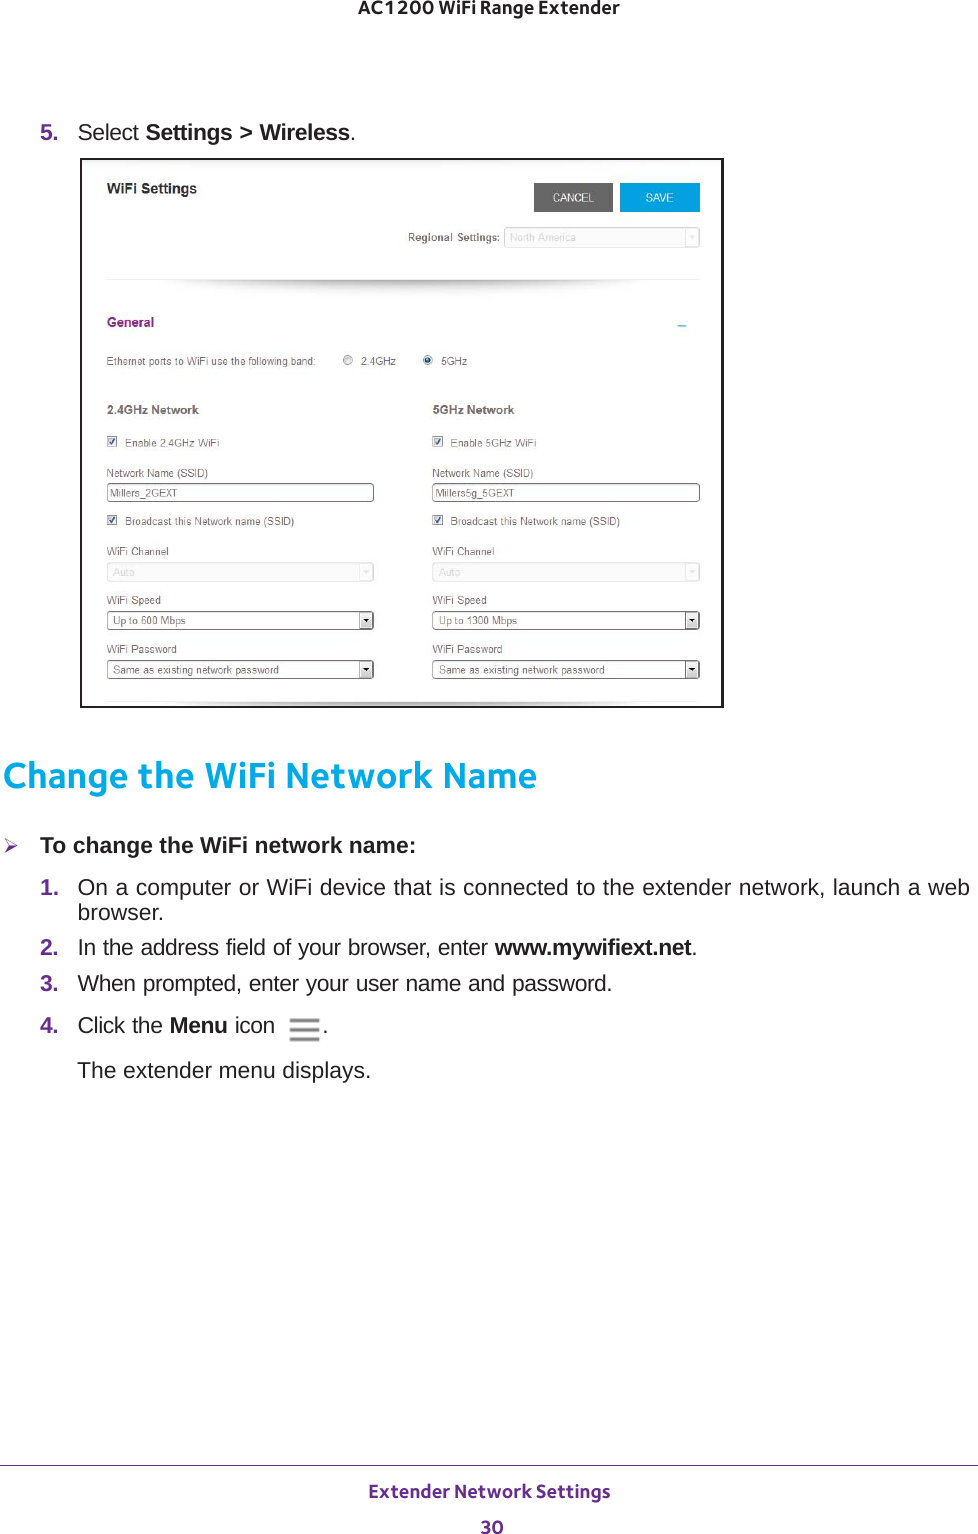 Extender Network Settings 30AC1200 WiFi Range Extender 5.  Select Settings &gt; Wireless.Change the WiFi Network NameTo change the WiFi network name:1.  On a computer or WiFi device that is connected to the extender network, launch a web browser. 2.  In the address field of your browser, enter www.mywifiext.net. 3.  When prompted, enter your user name and password.4.  Click the Menu icon  .The extender menu displays.